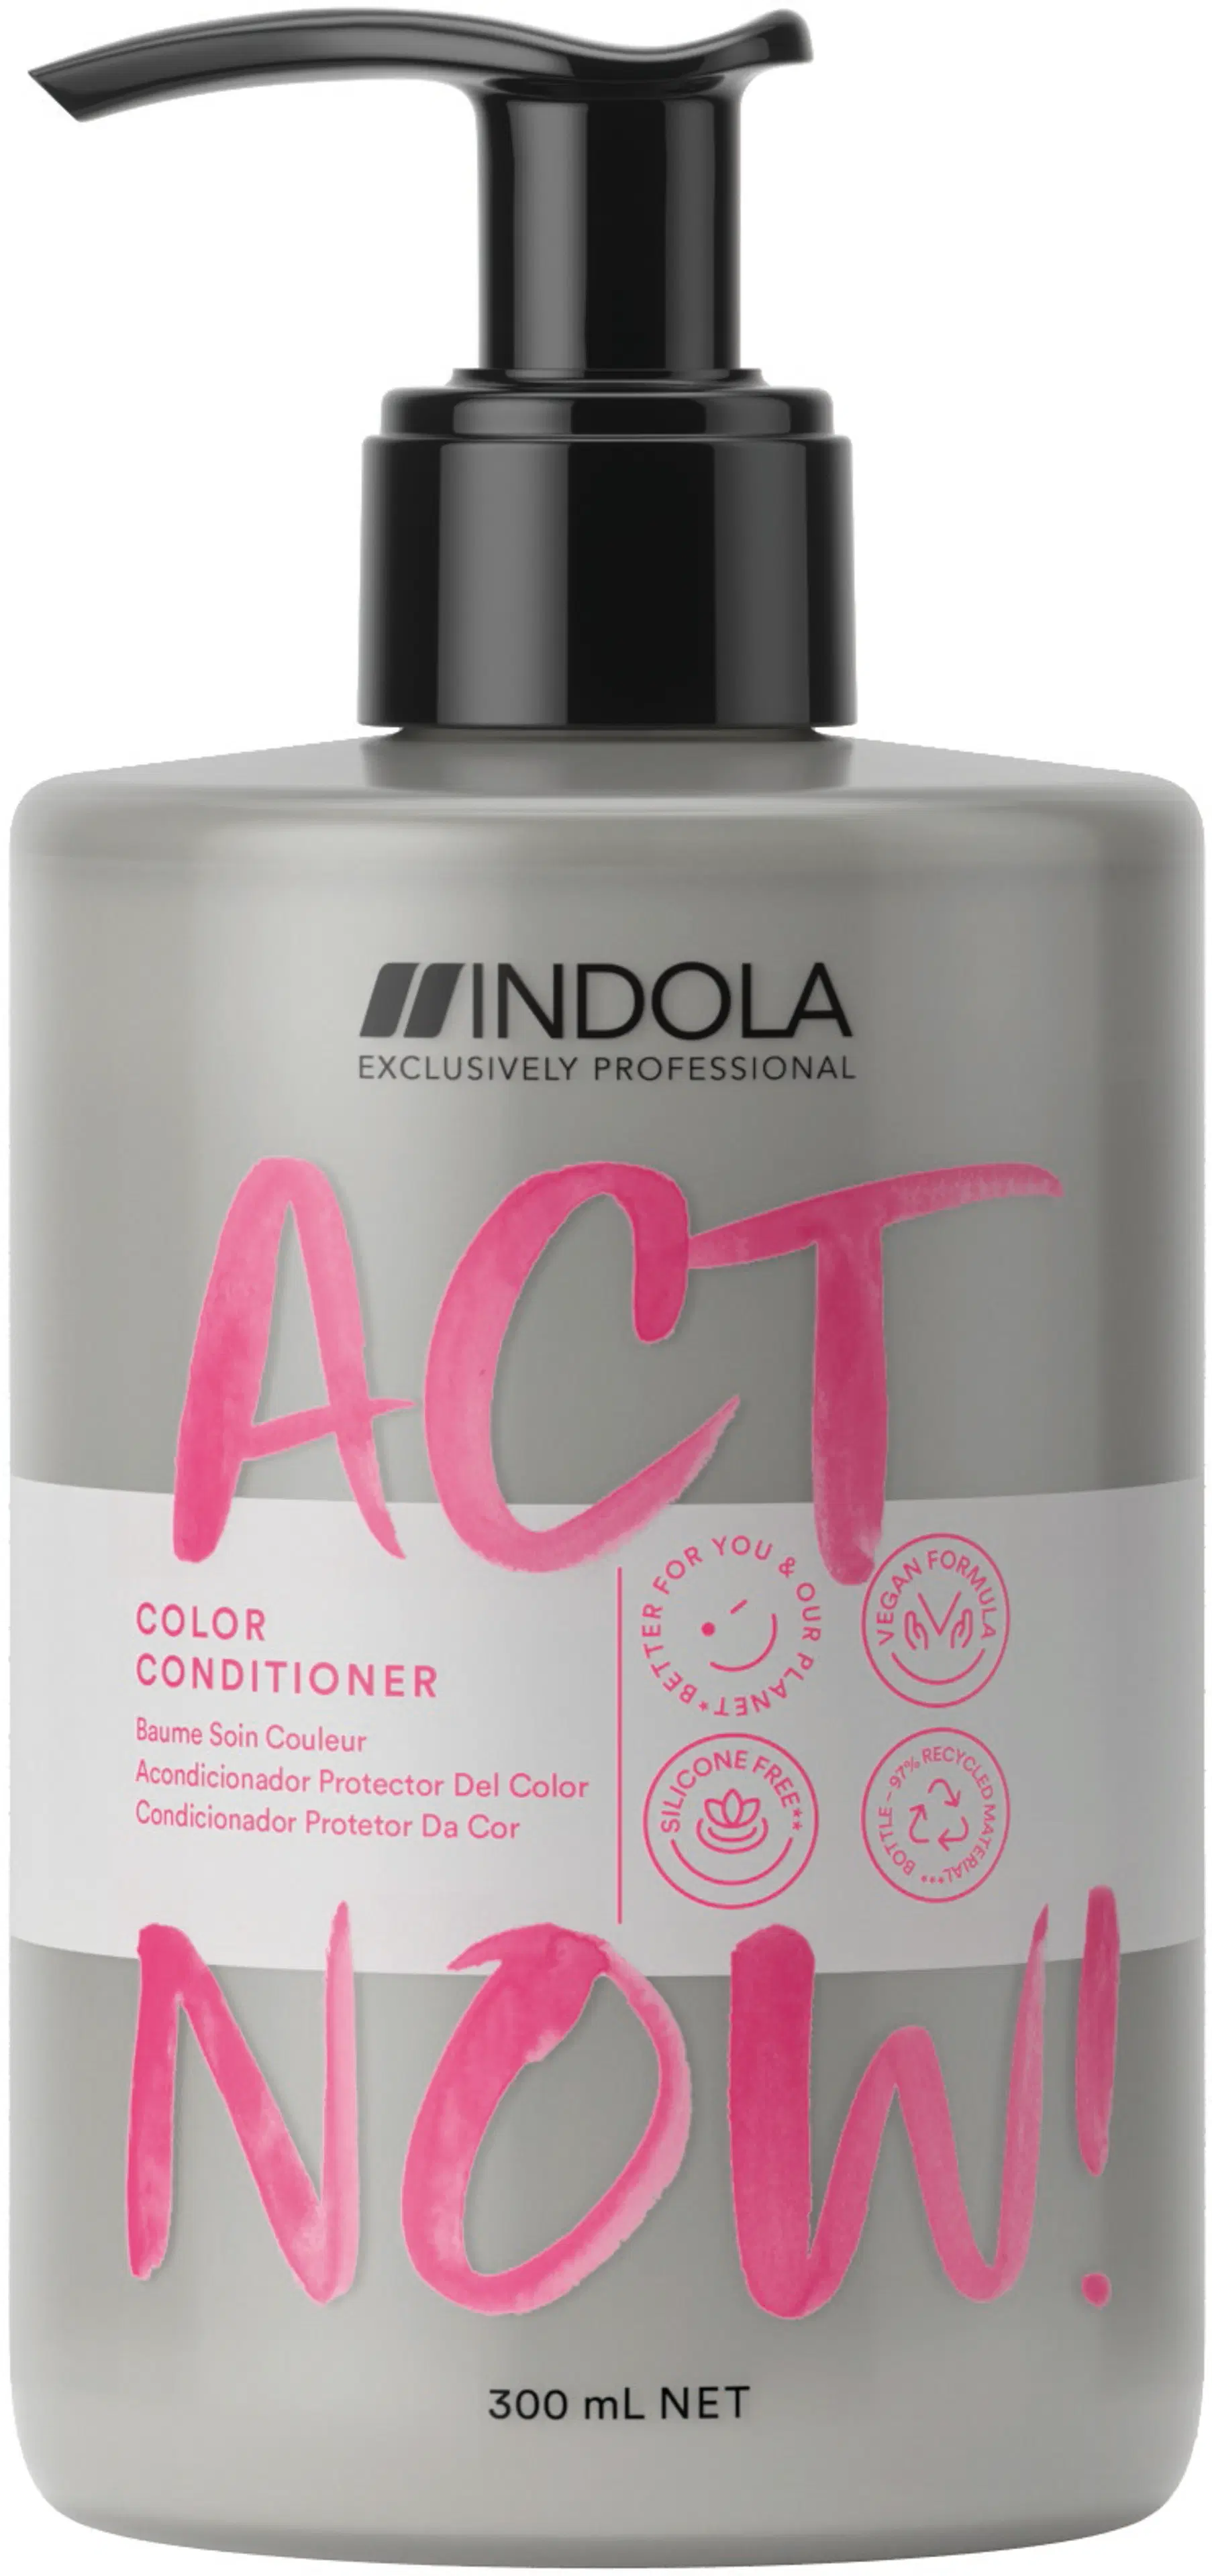 Indola ACT NOW! Color Conditioner hoitoaine 300 ml